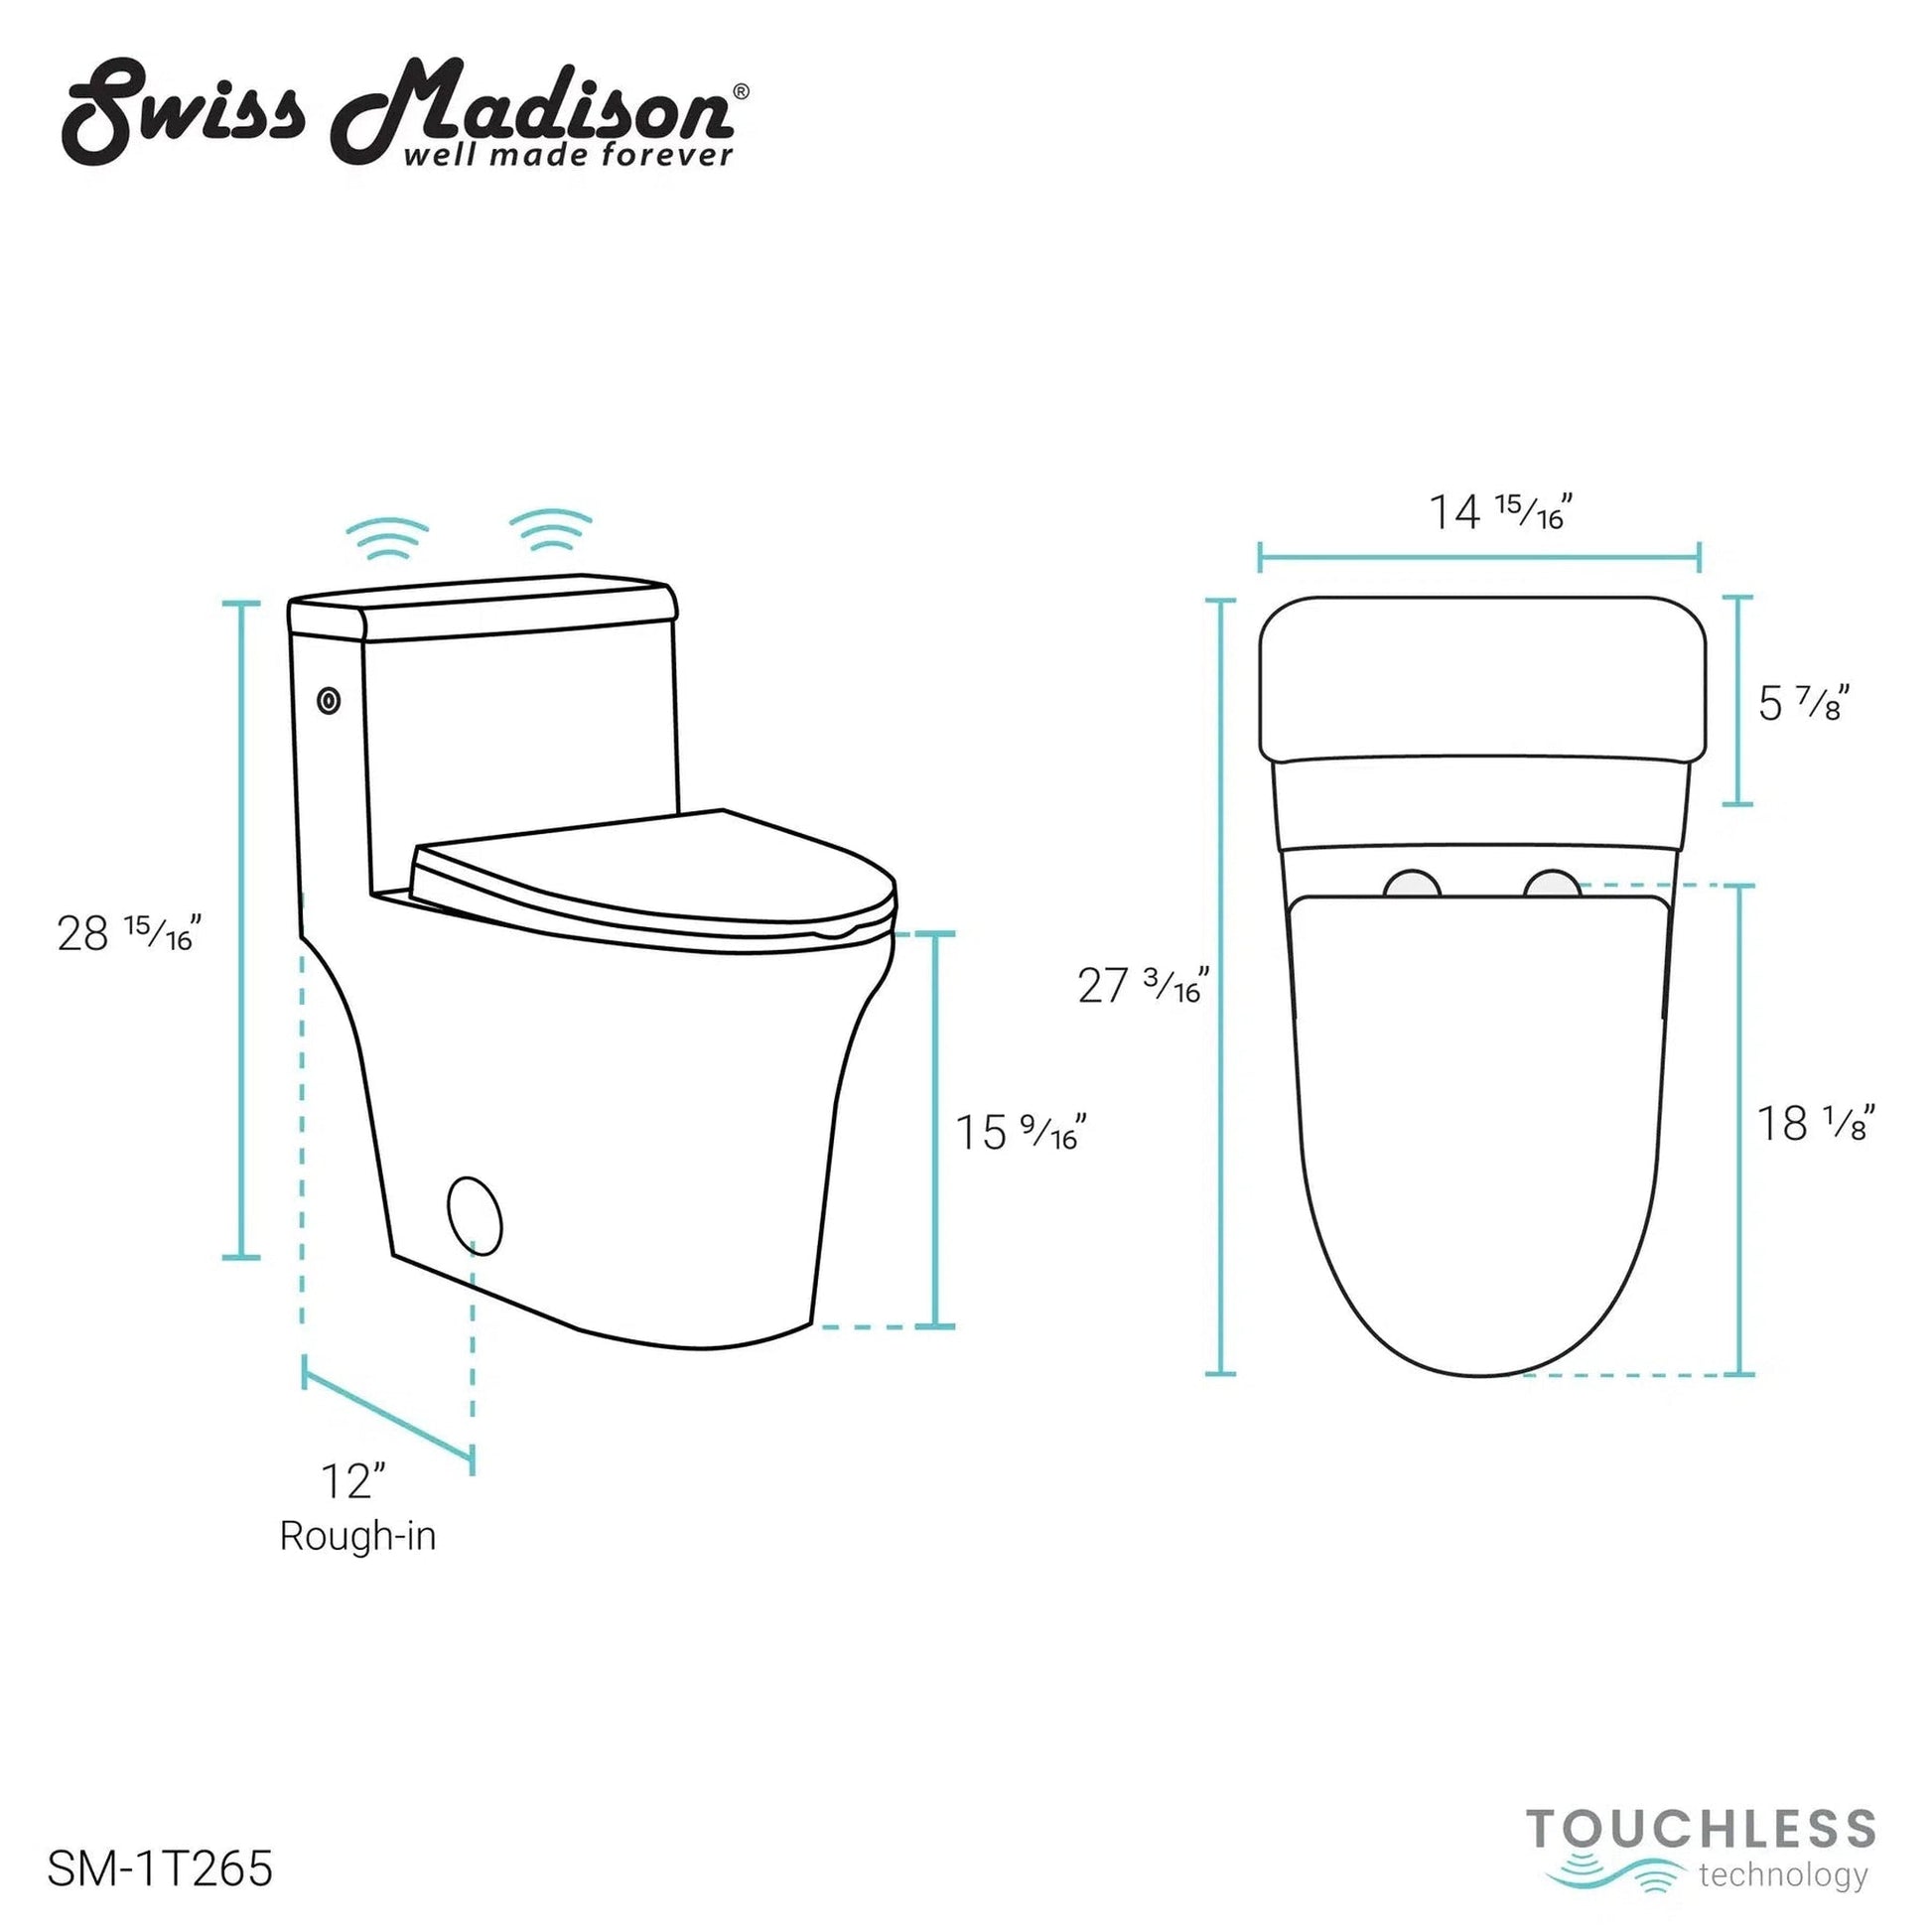 Swiss Madison Hugo 15" x 29" White One-Piece Elongated Floor Mounted Toilet With 1.1/1.6 GPF Touchless Dual-Flush Function